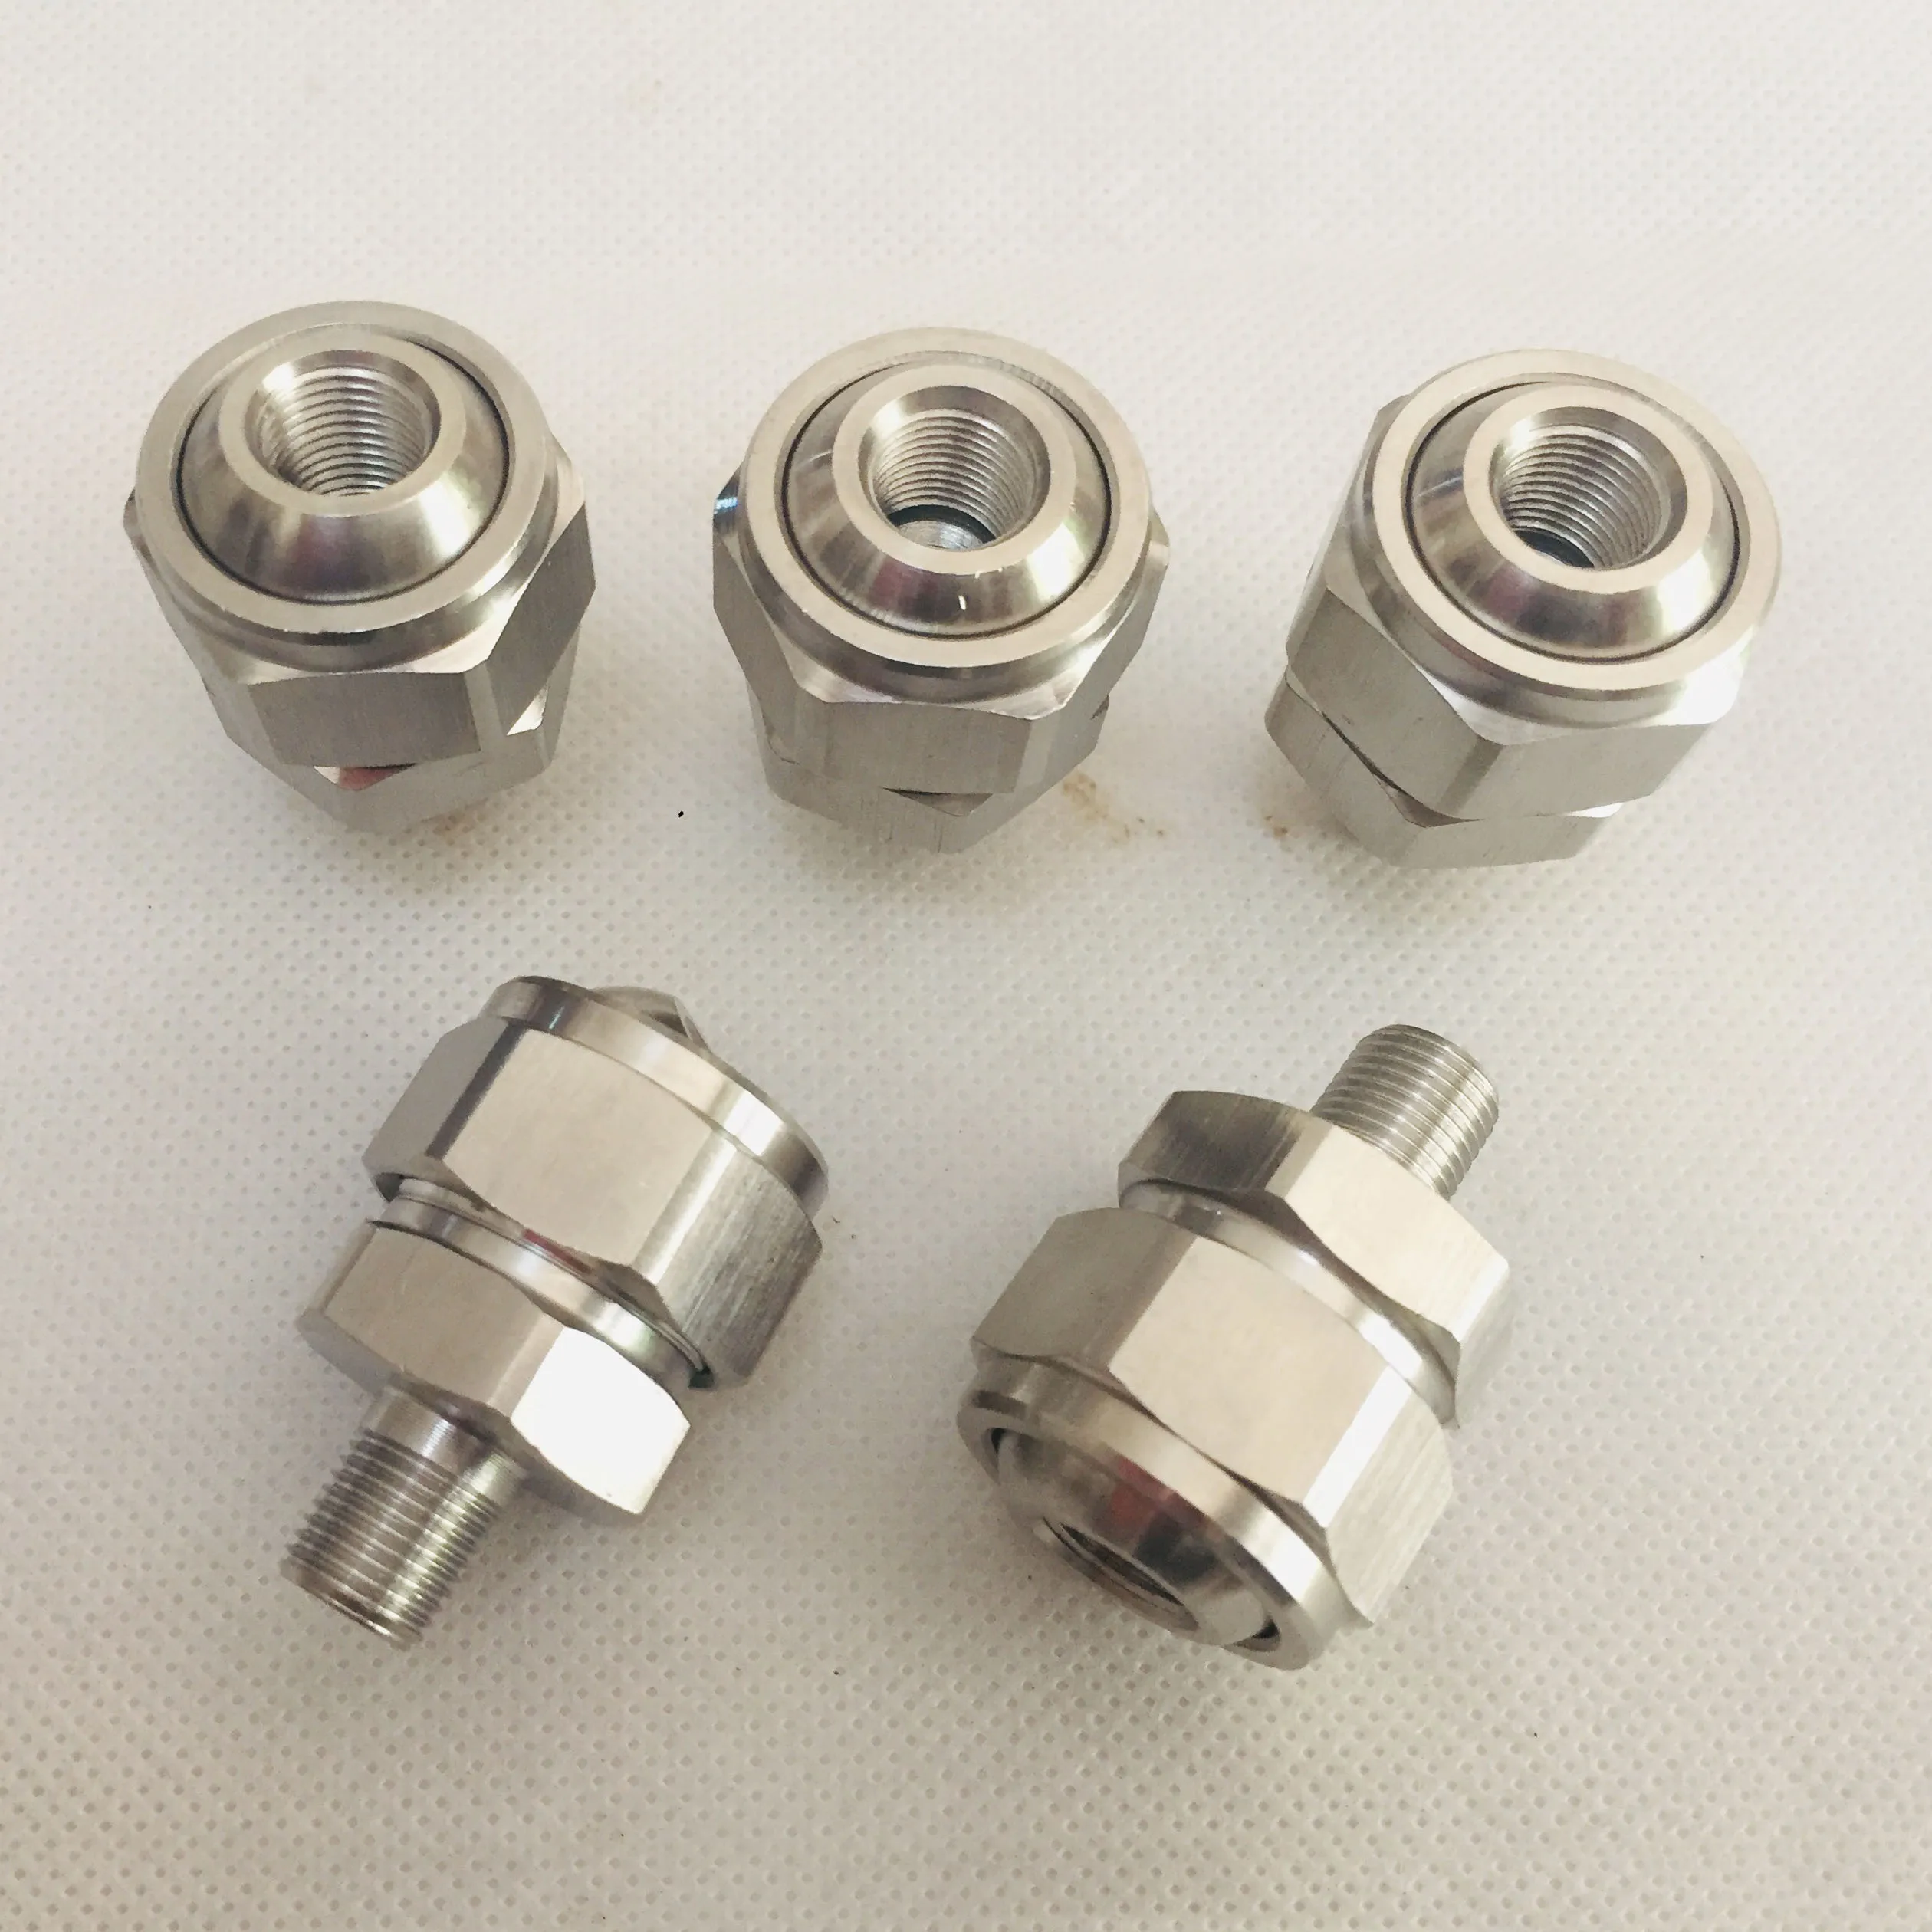 ( 10 pcs/lot )1/8" 1/4" Universal rotating nozzle connection base joint, fan-shaped cone and other industrial nozzle bases